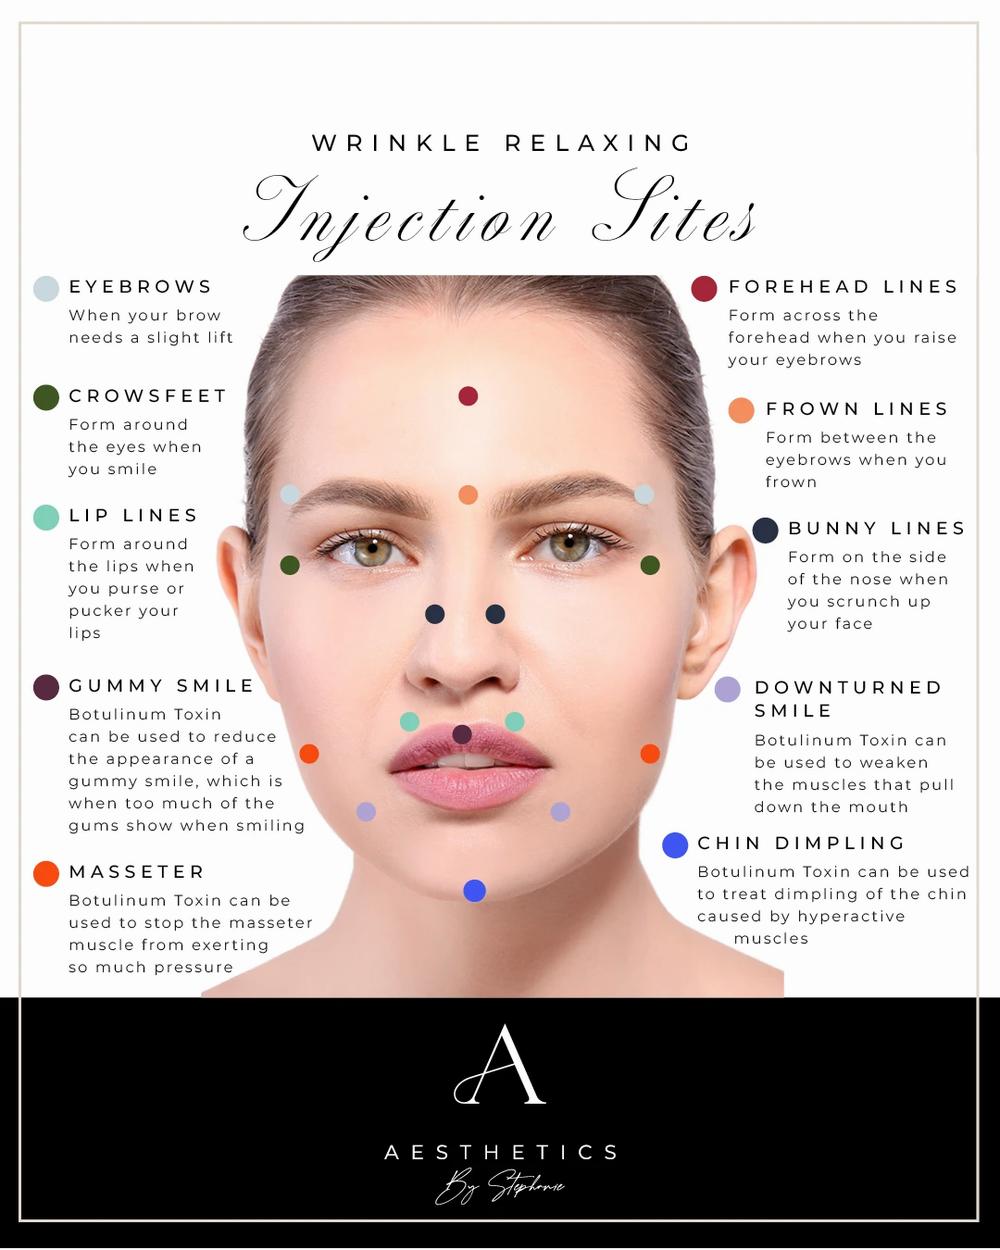 An illustration showing the different areas of the face where injections can be used to relax wrinkles.